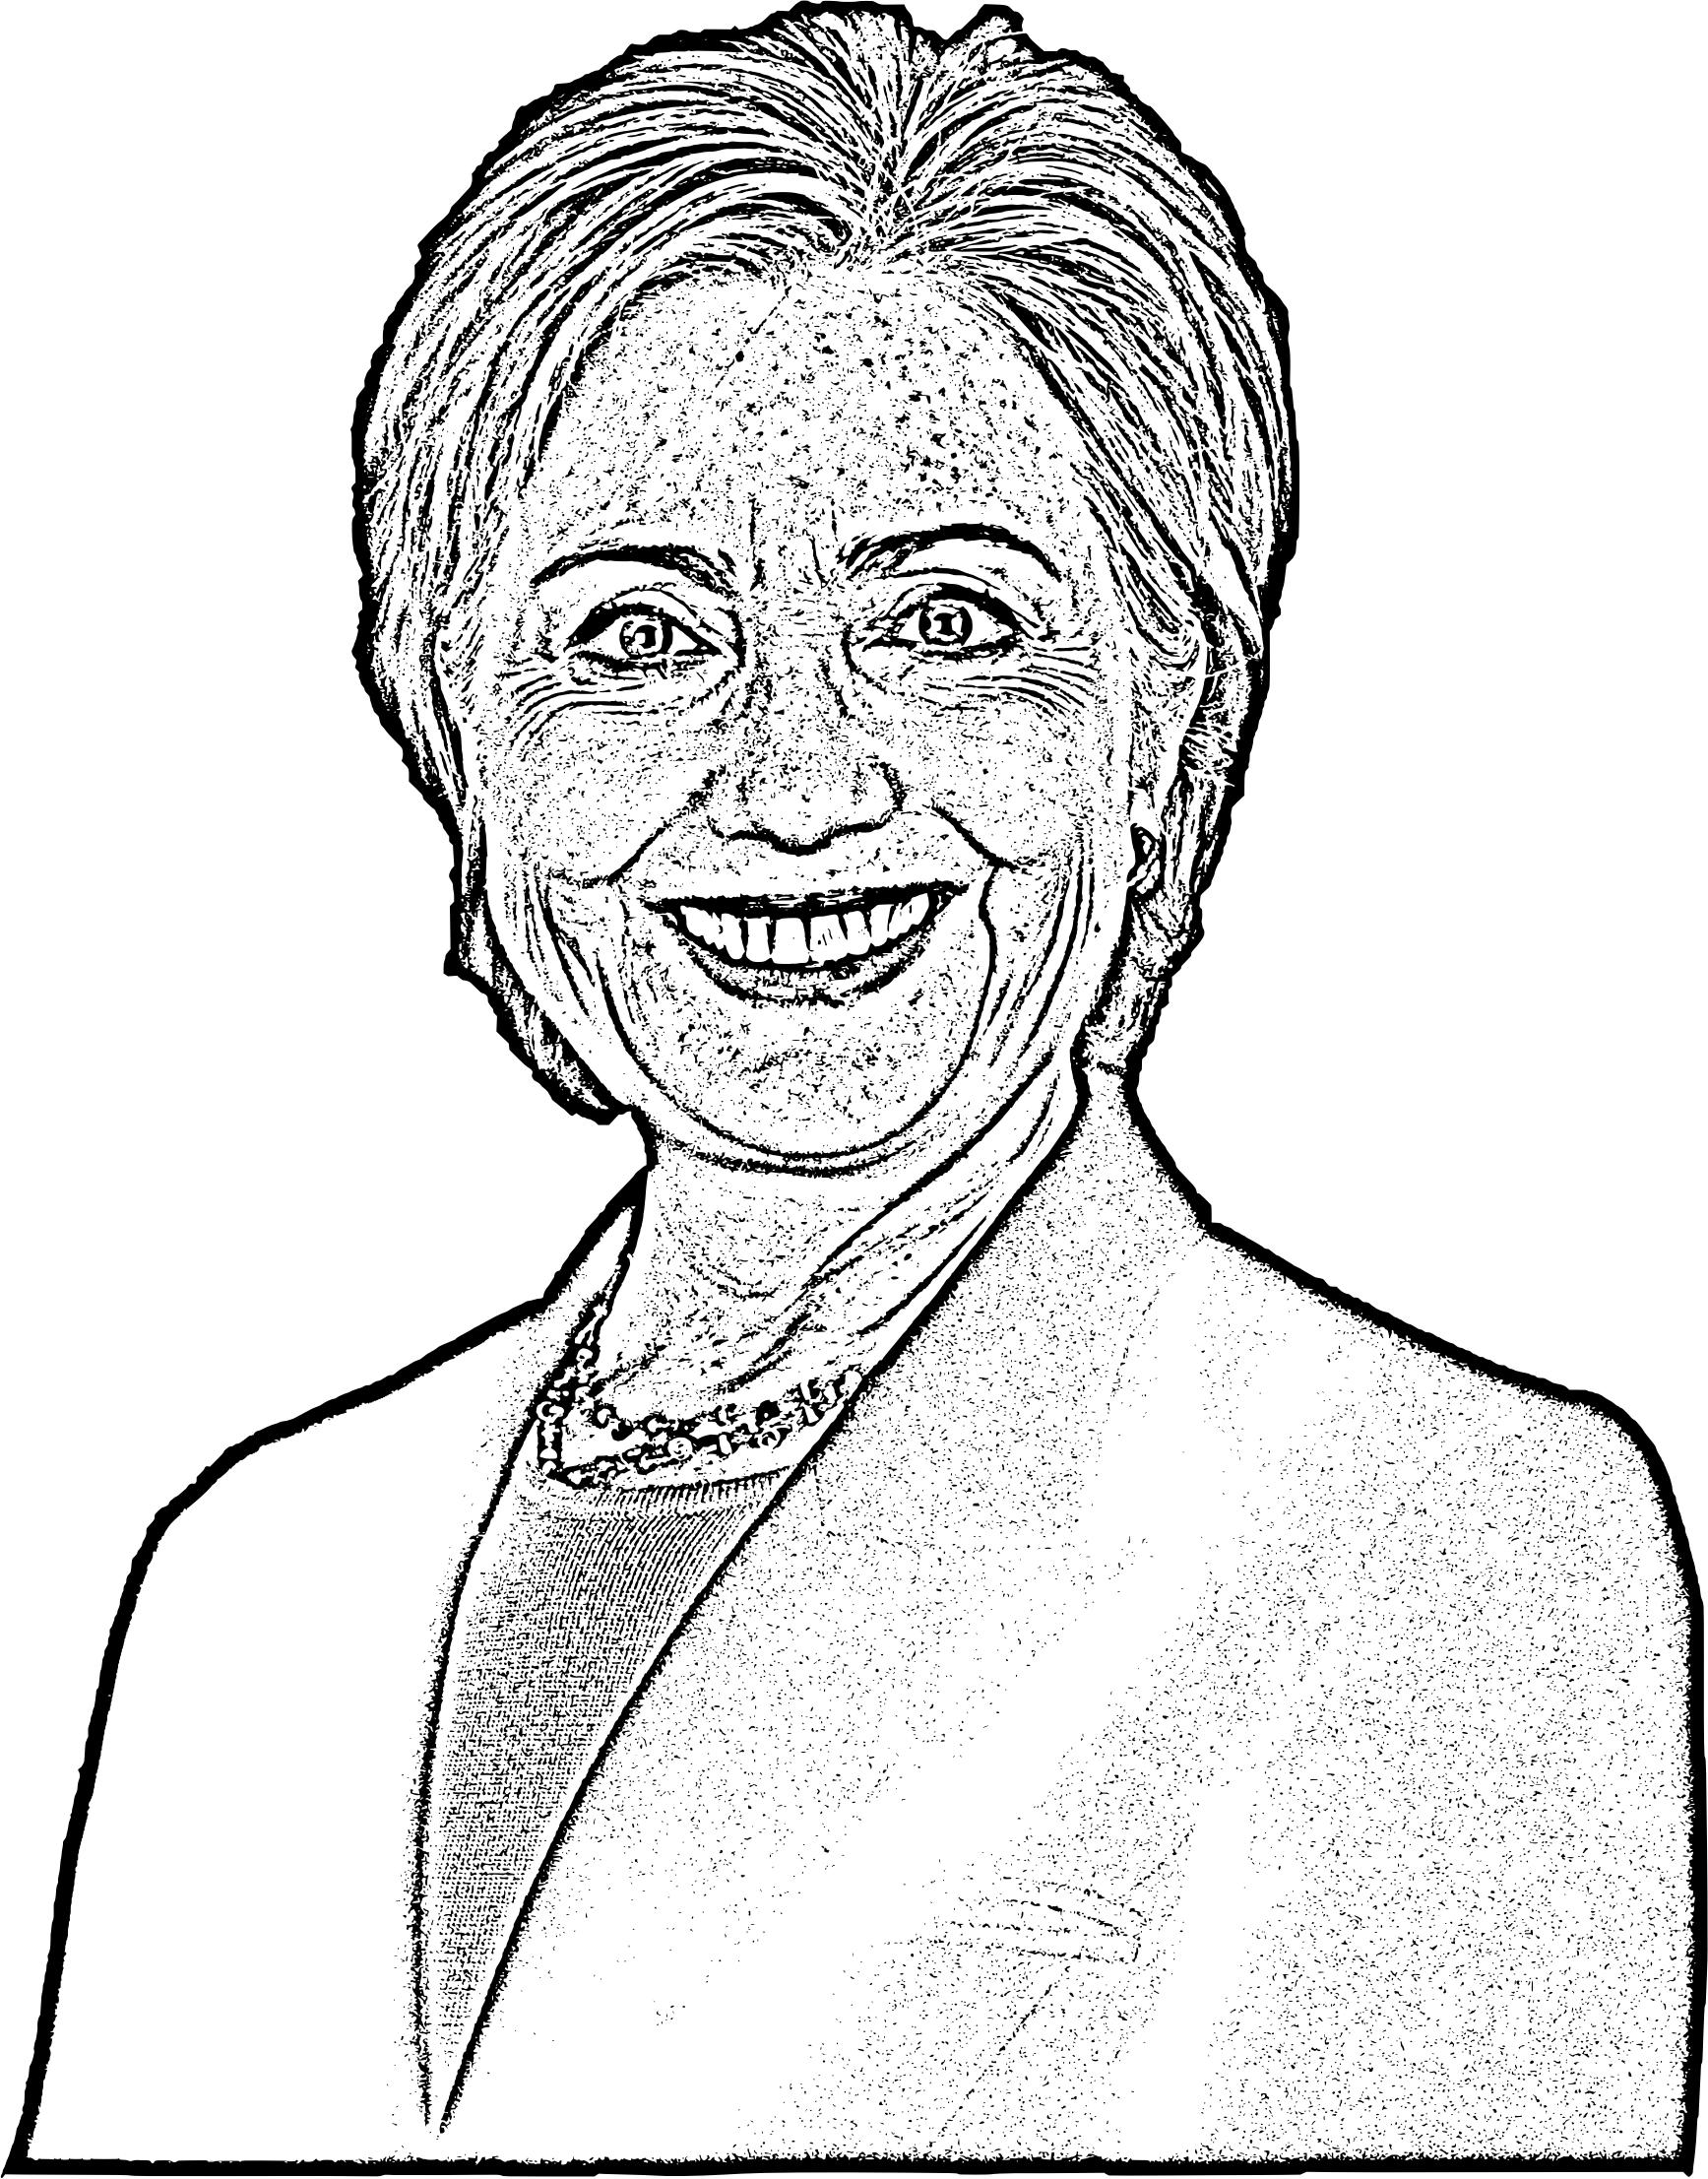 Hillary Clinton as President of the United States (Sketch) png